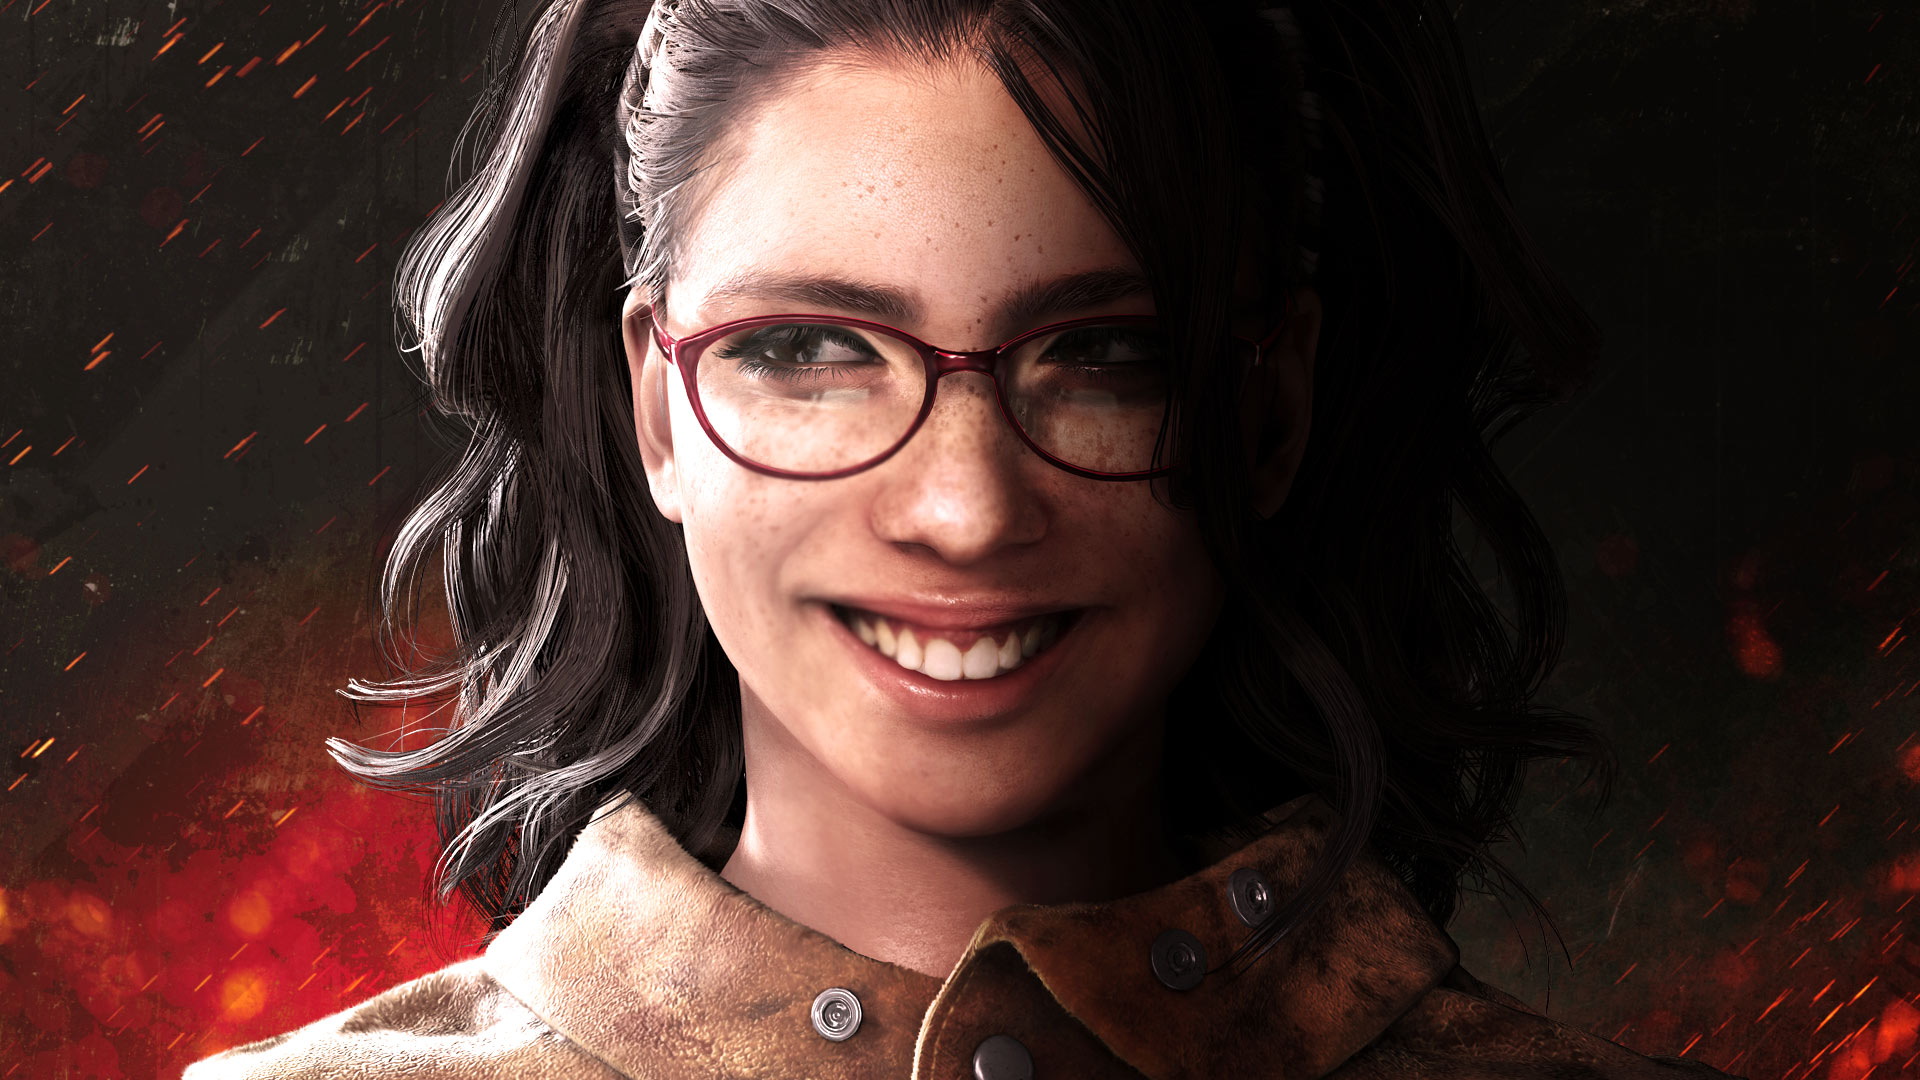 General 1920x1080 Devil May Cry Devil May Cry 5 video games smiling Nico (Devil May Cry)